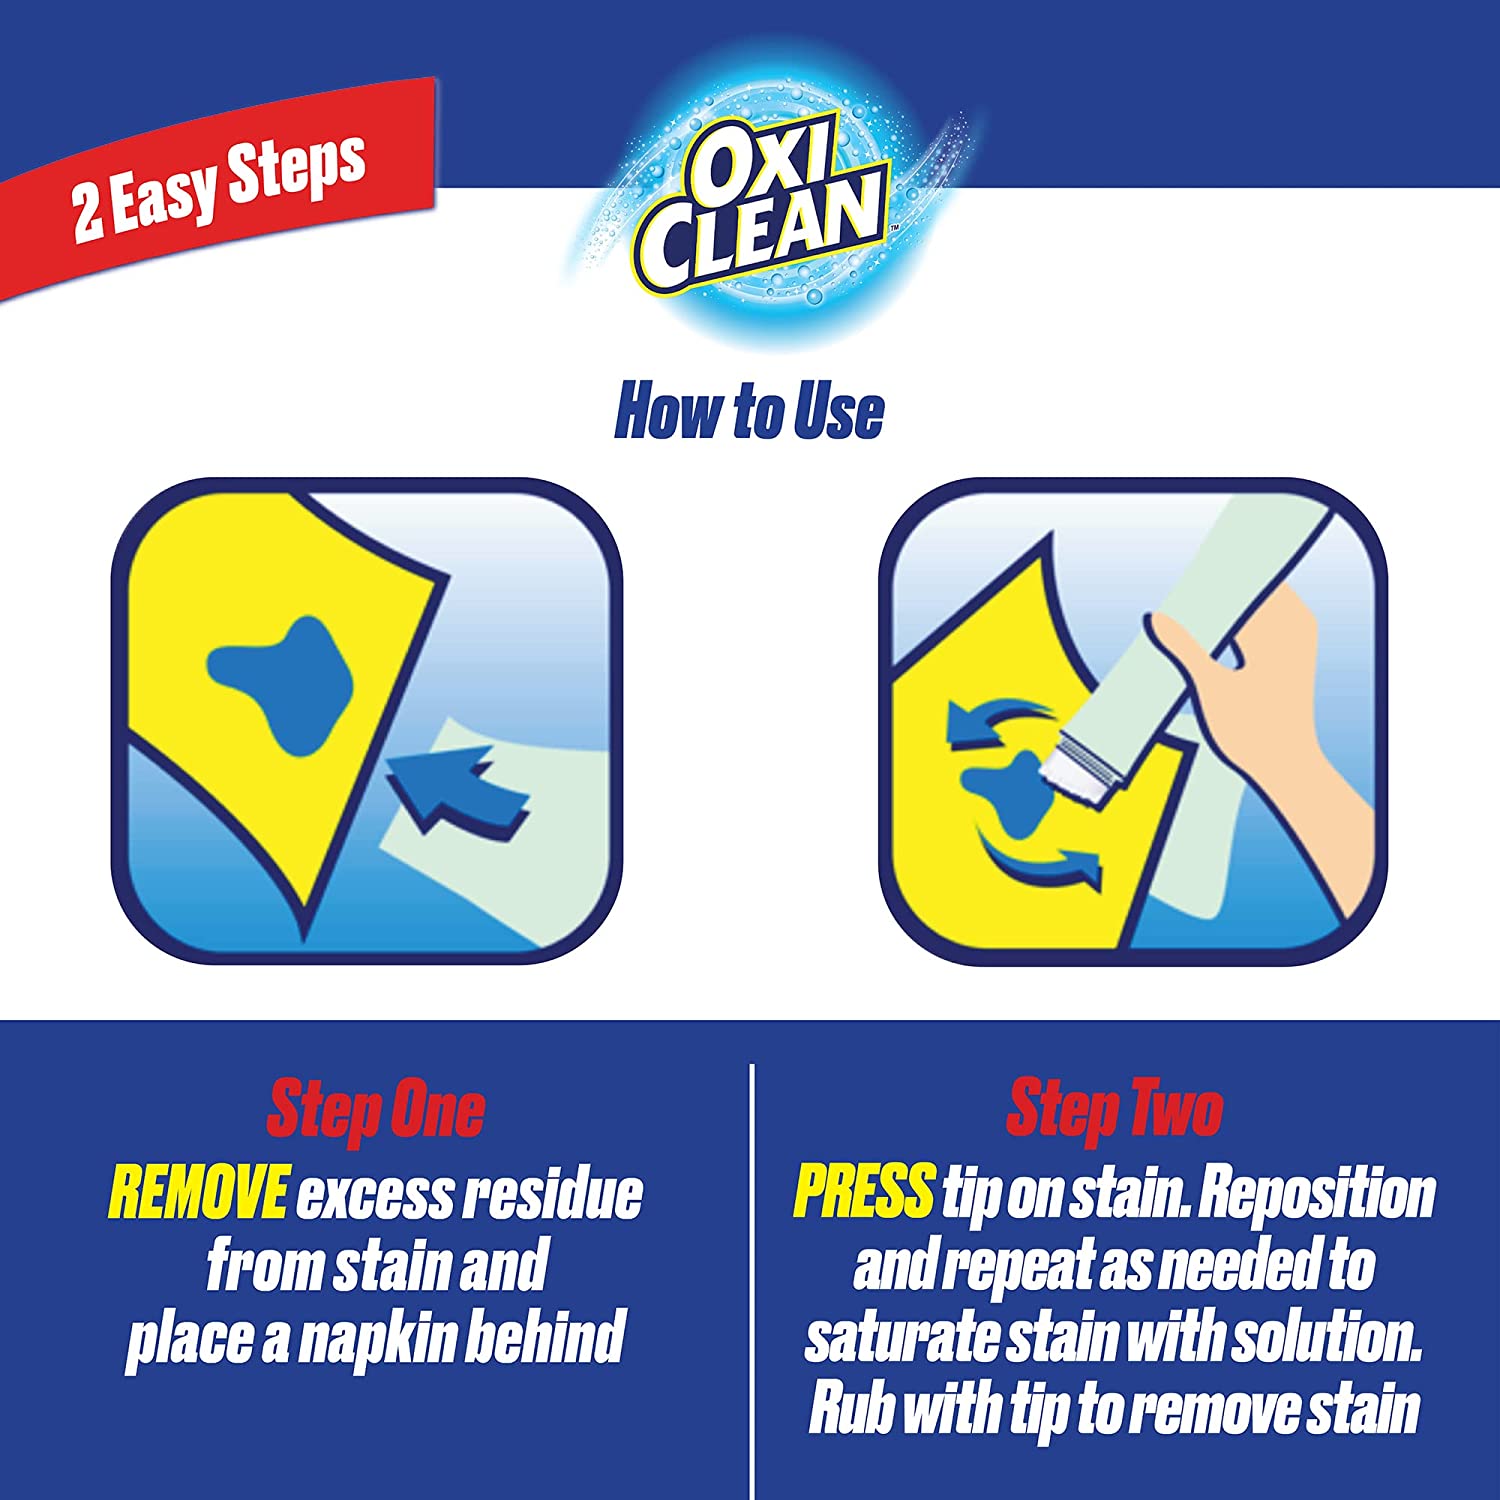 CR Brands OxiClean on The Go Stain Remover Pen for Clothes and Fabric, to Go Instant Stain Removal Stick, 6-Count (56454)